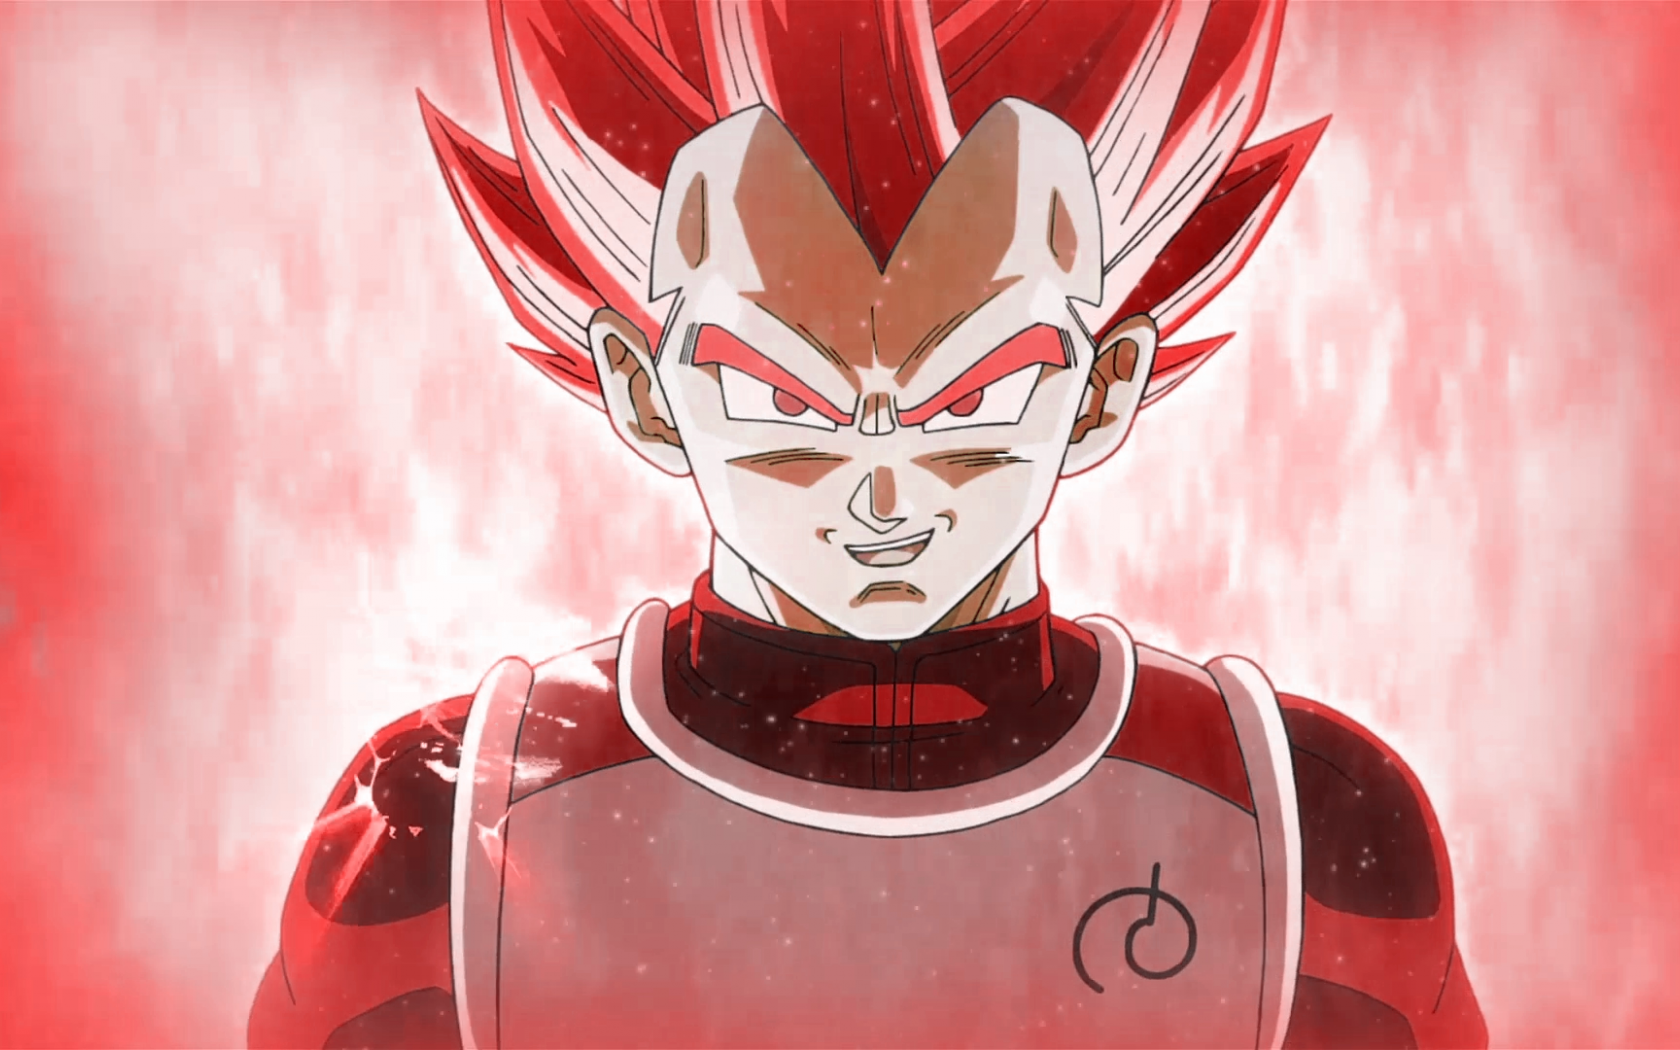 What If Vegeta Gained A Red Aura Instead Of Blue